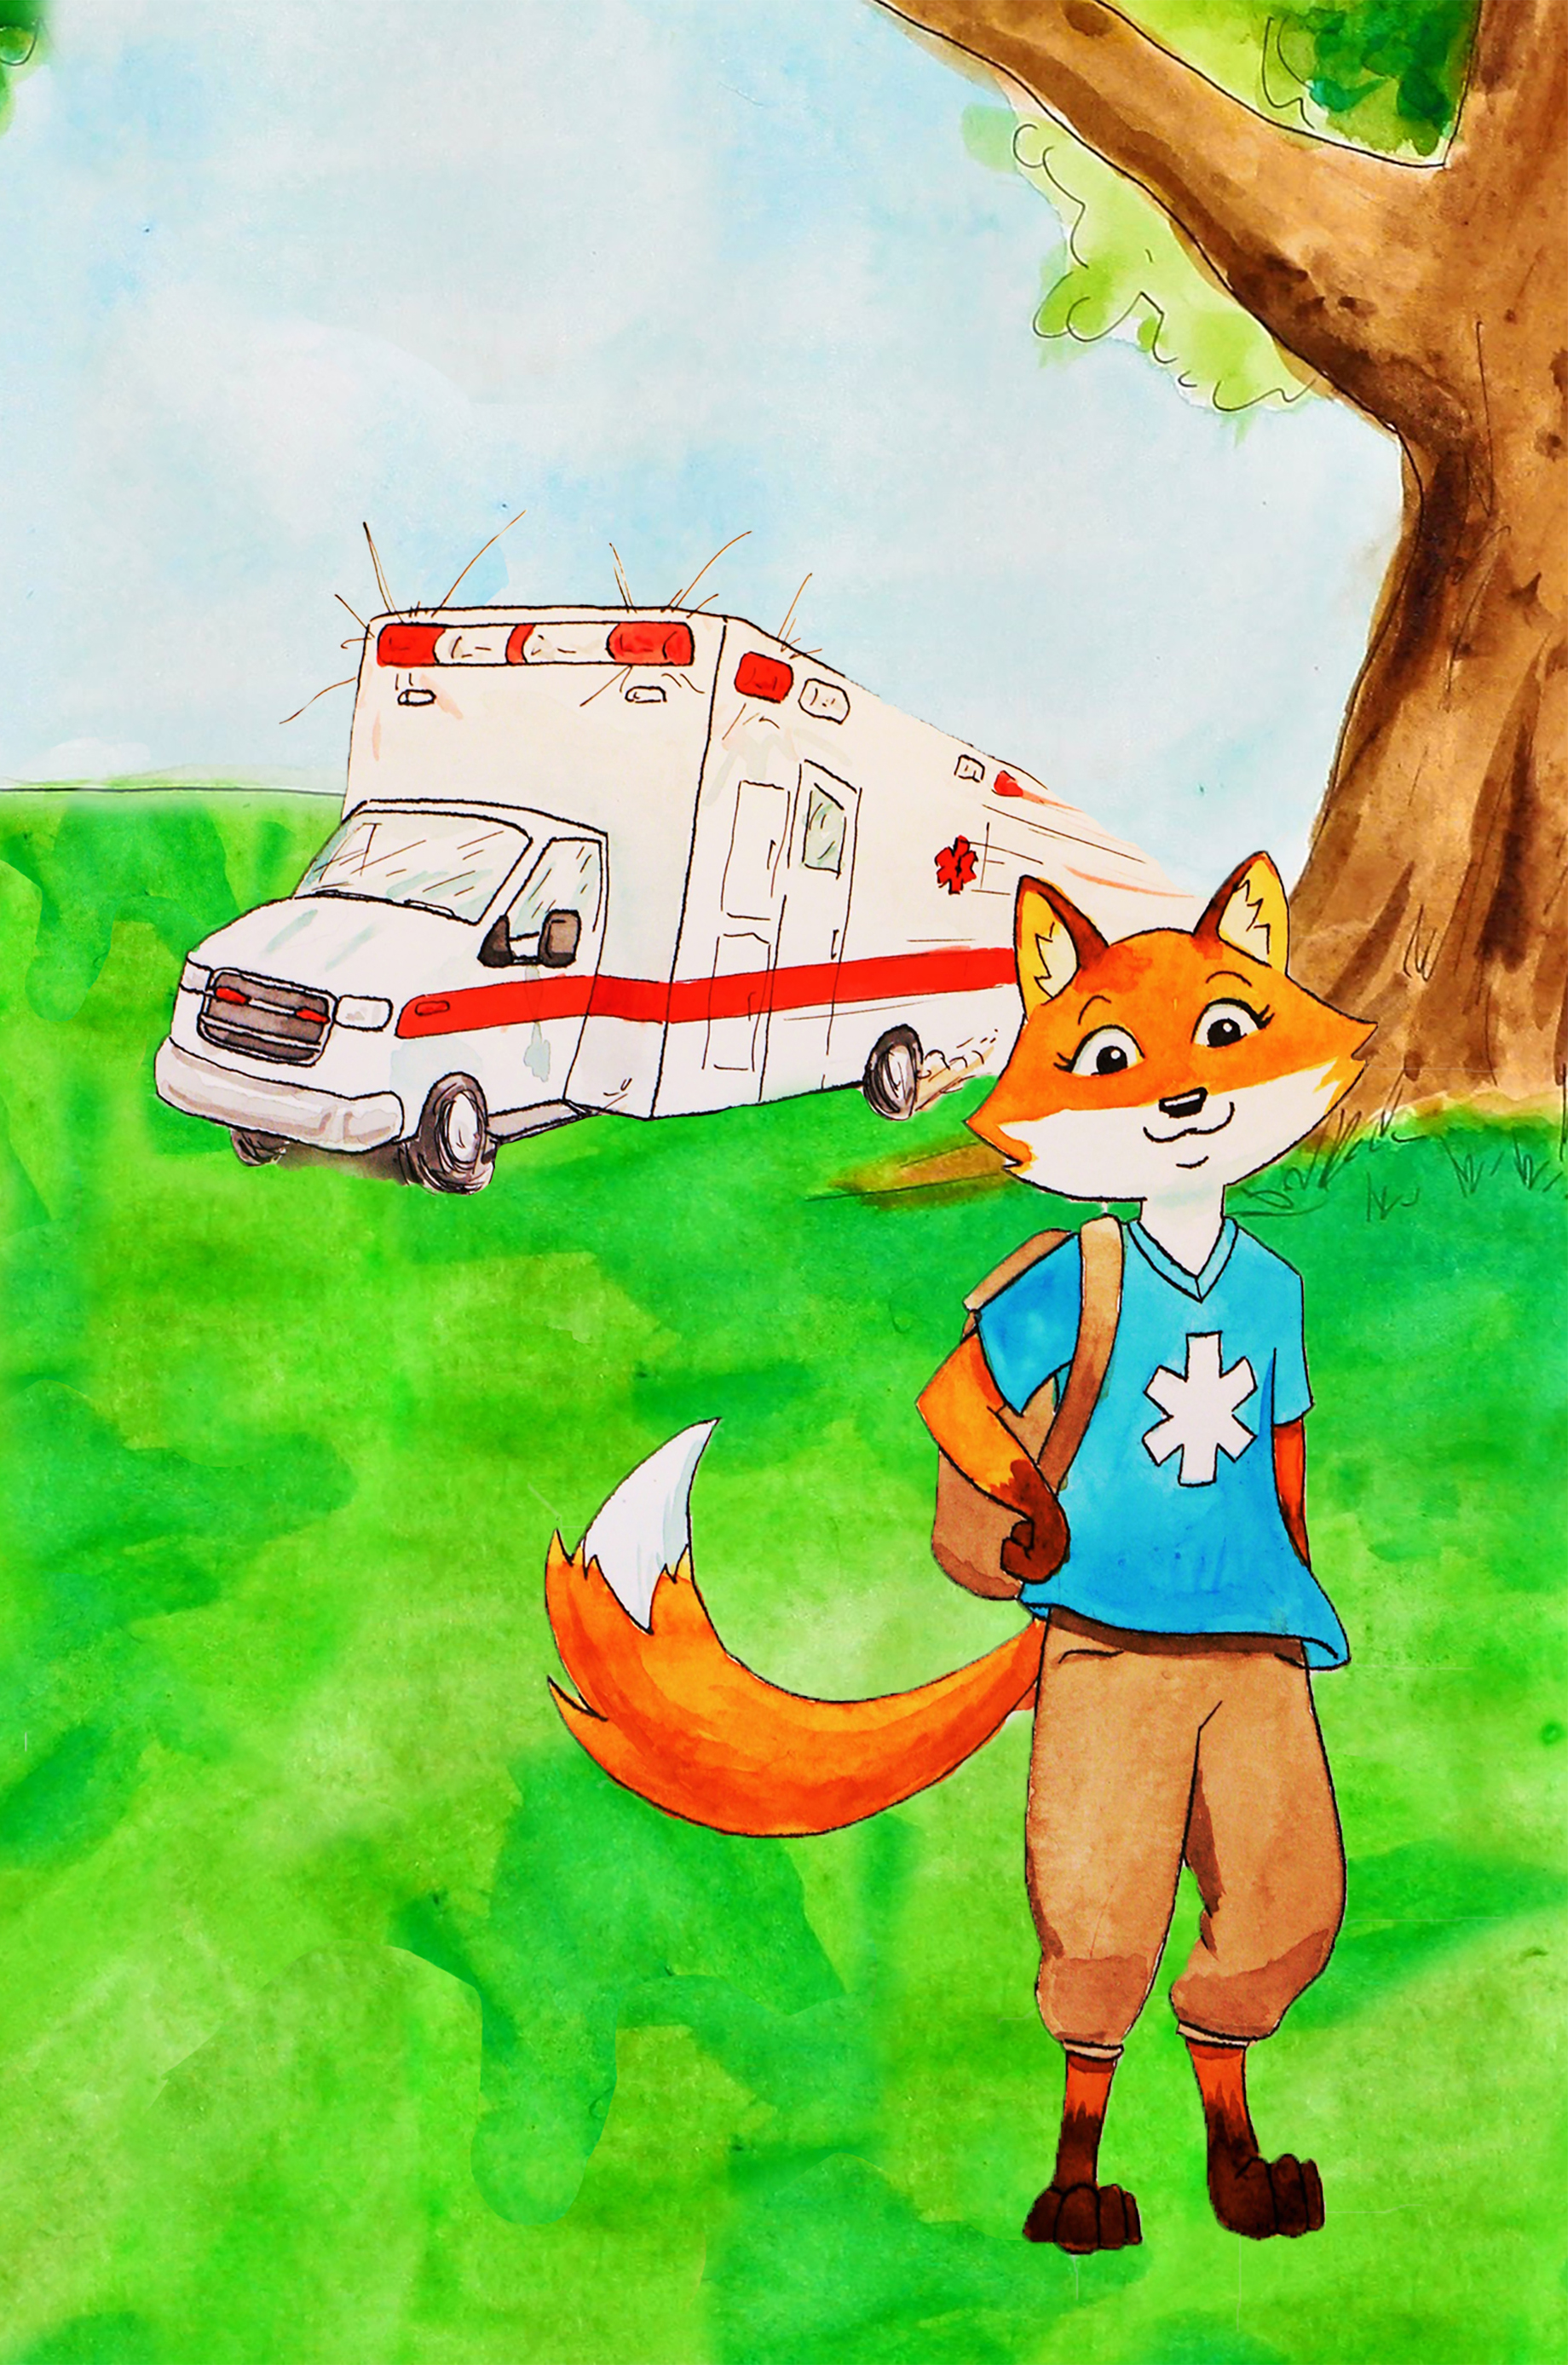 How to Prepare Your Children for an Ambulance Call